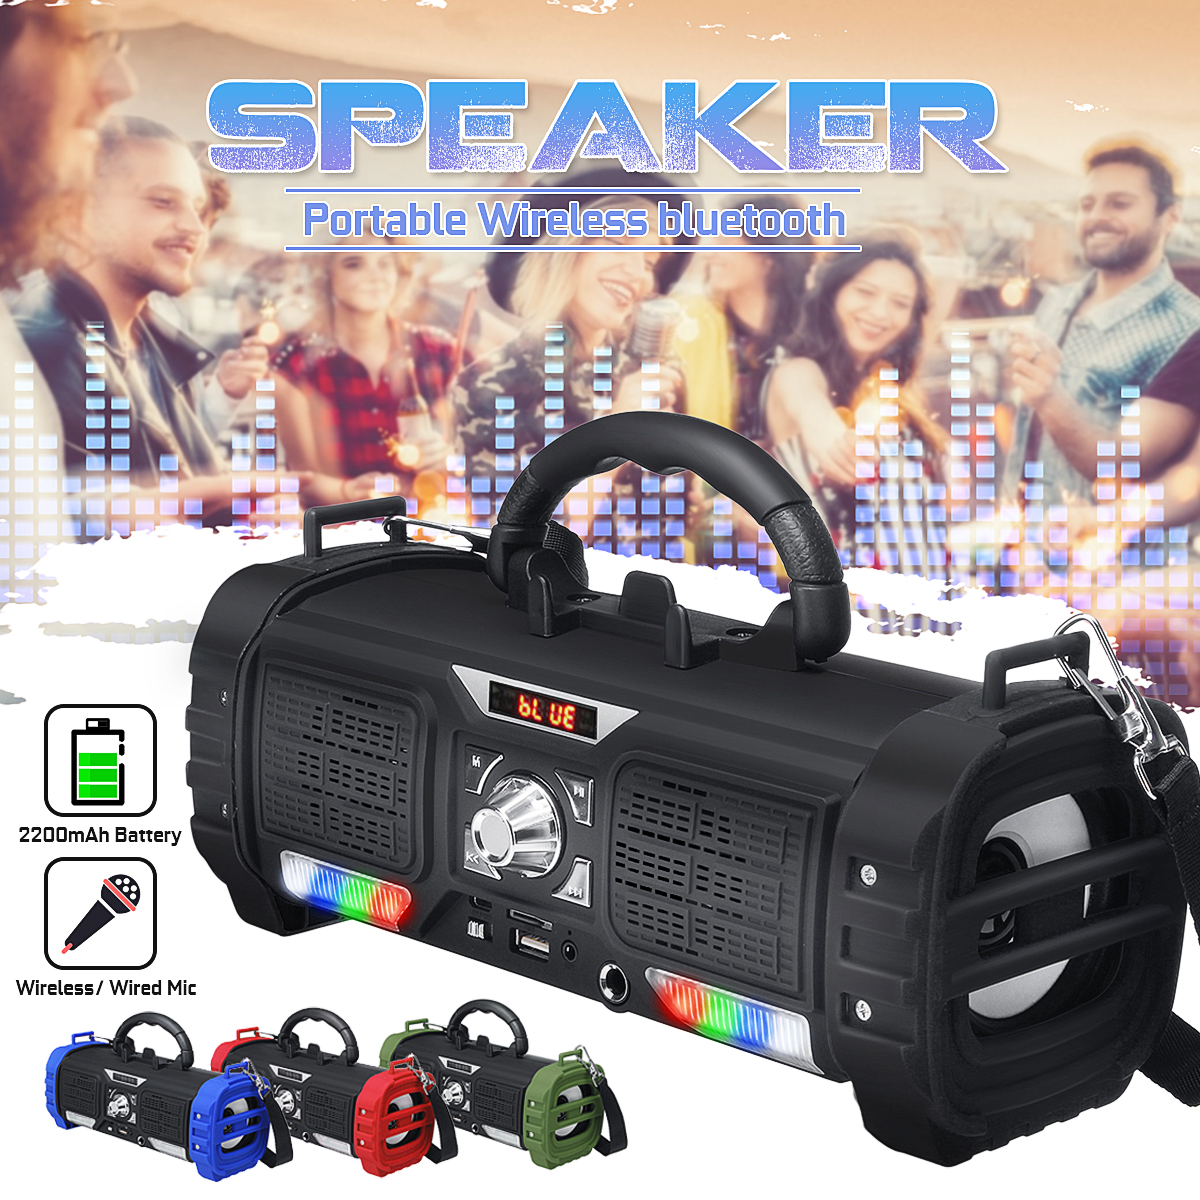 Portable-Wireless-bluetooth-Speaker-LED-Light-Heavy-Bass-2200mAh-TF-Card-Speaker-with-Mic-with-Phone-1503608-2